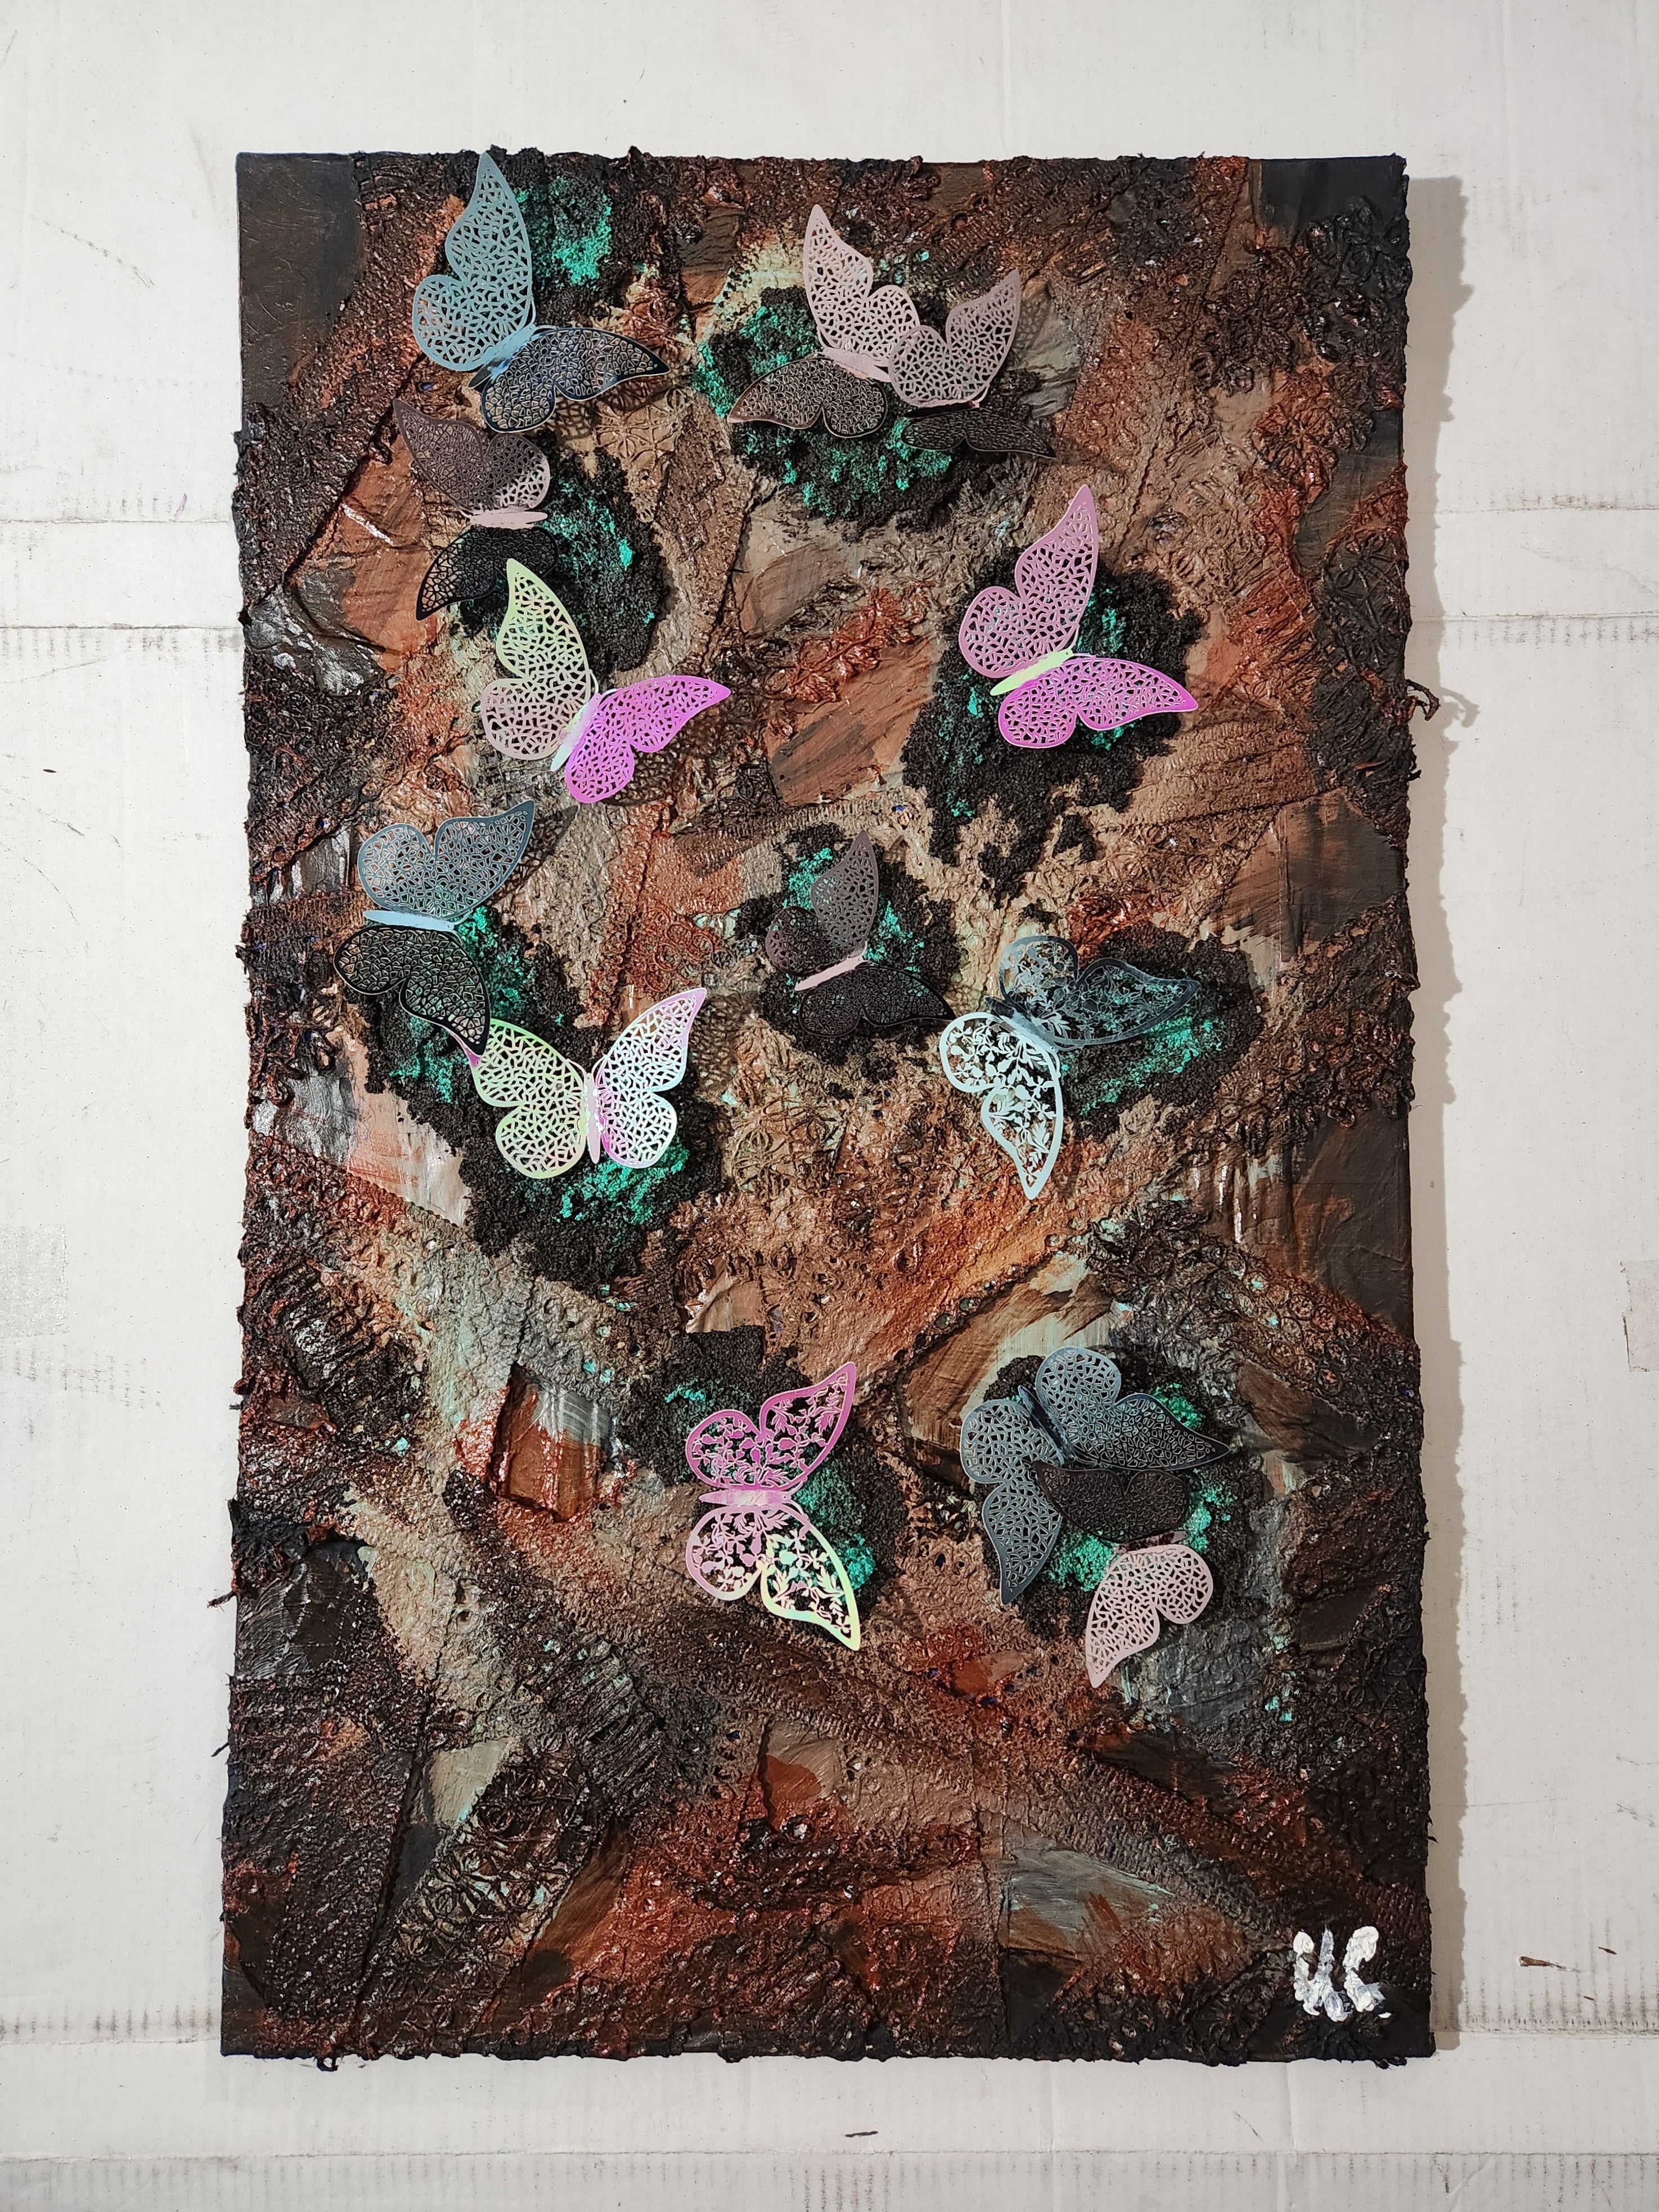 'A MAGIC NESTS' - Acrylic, Object, and Mixed Media on Canvas